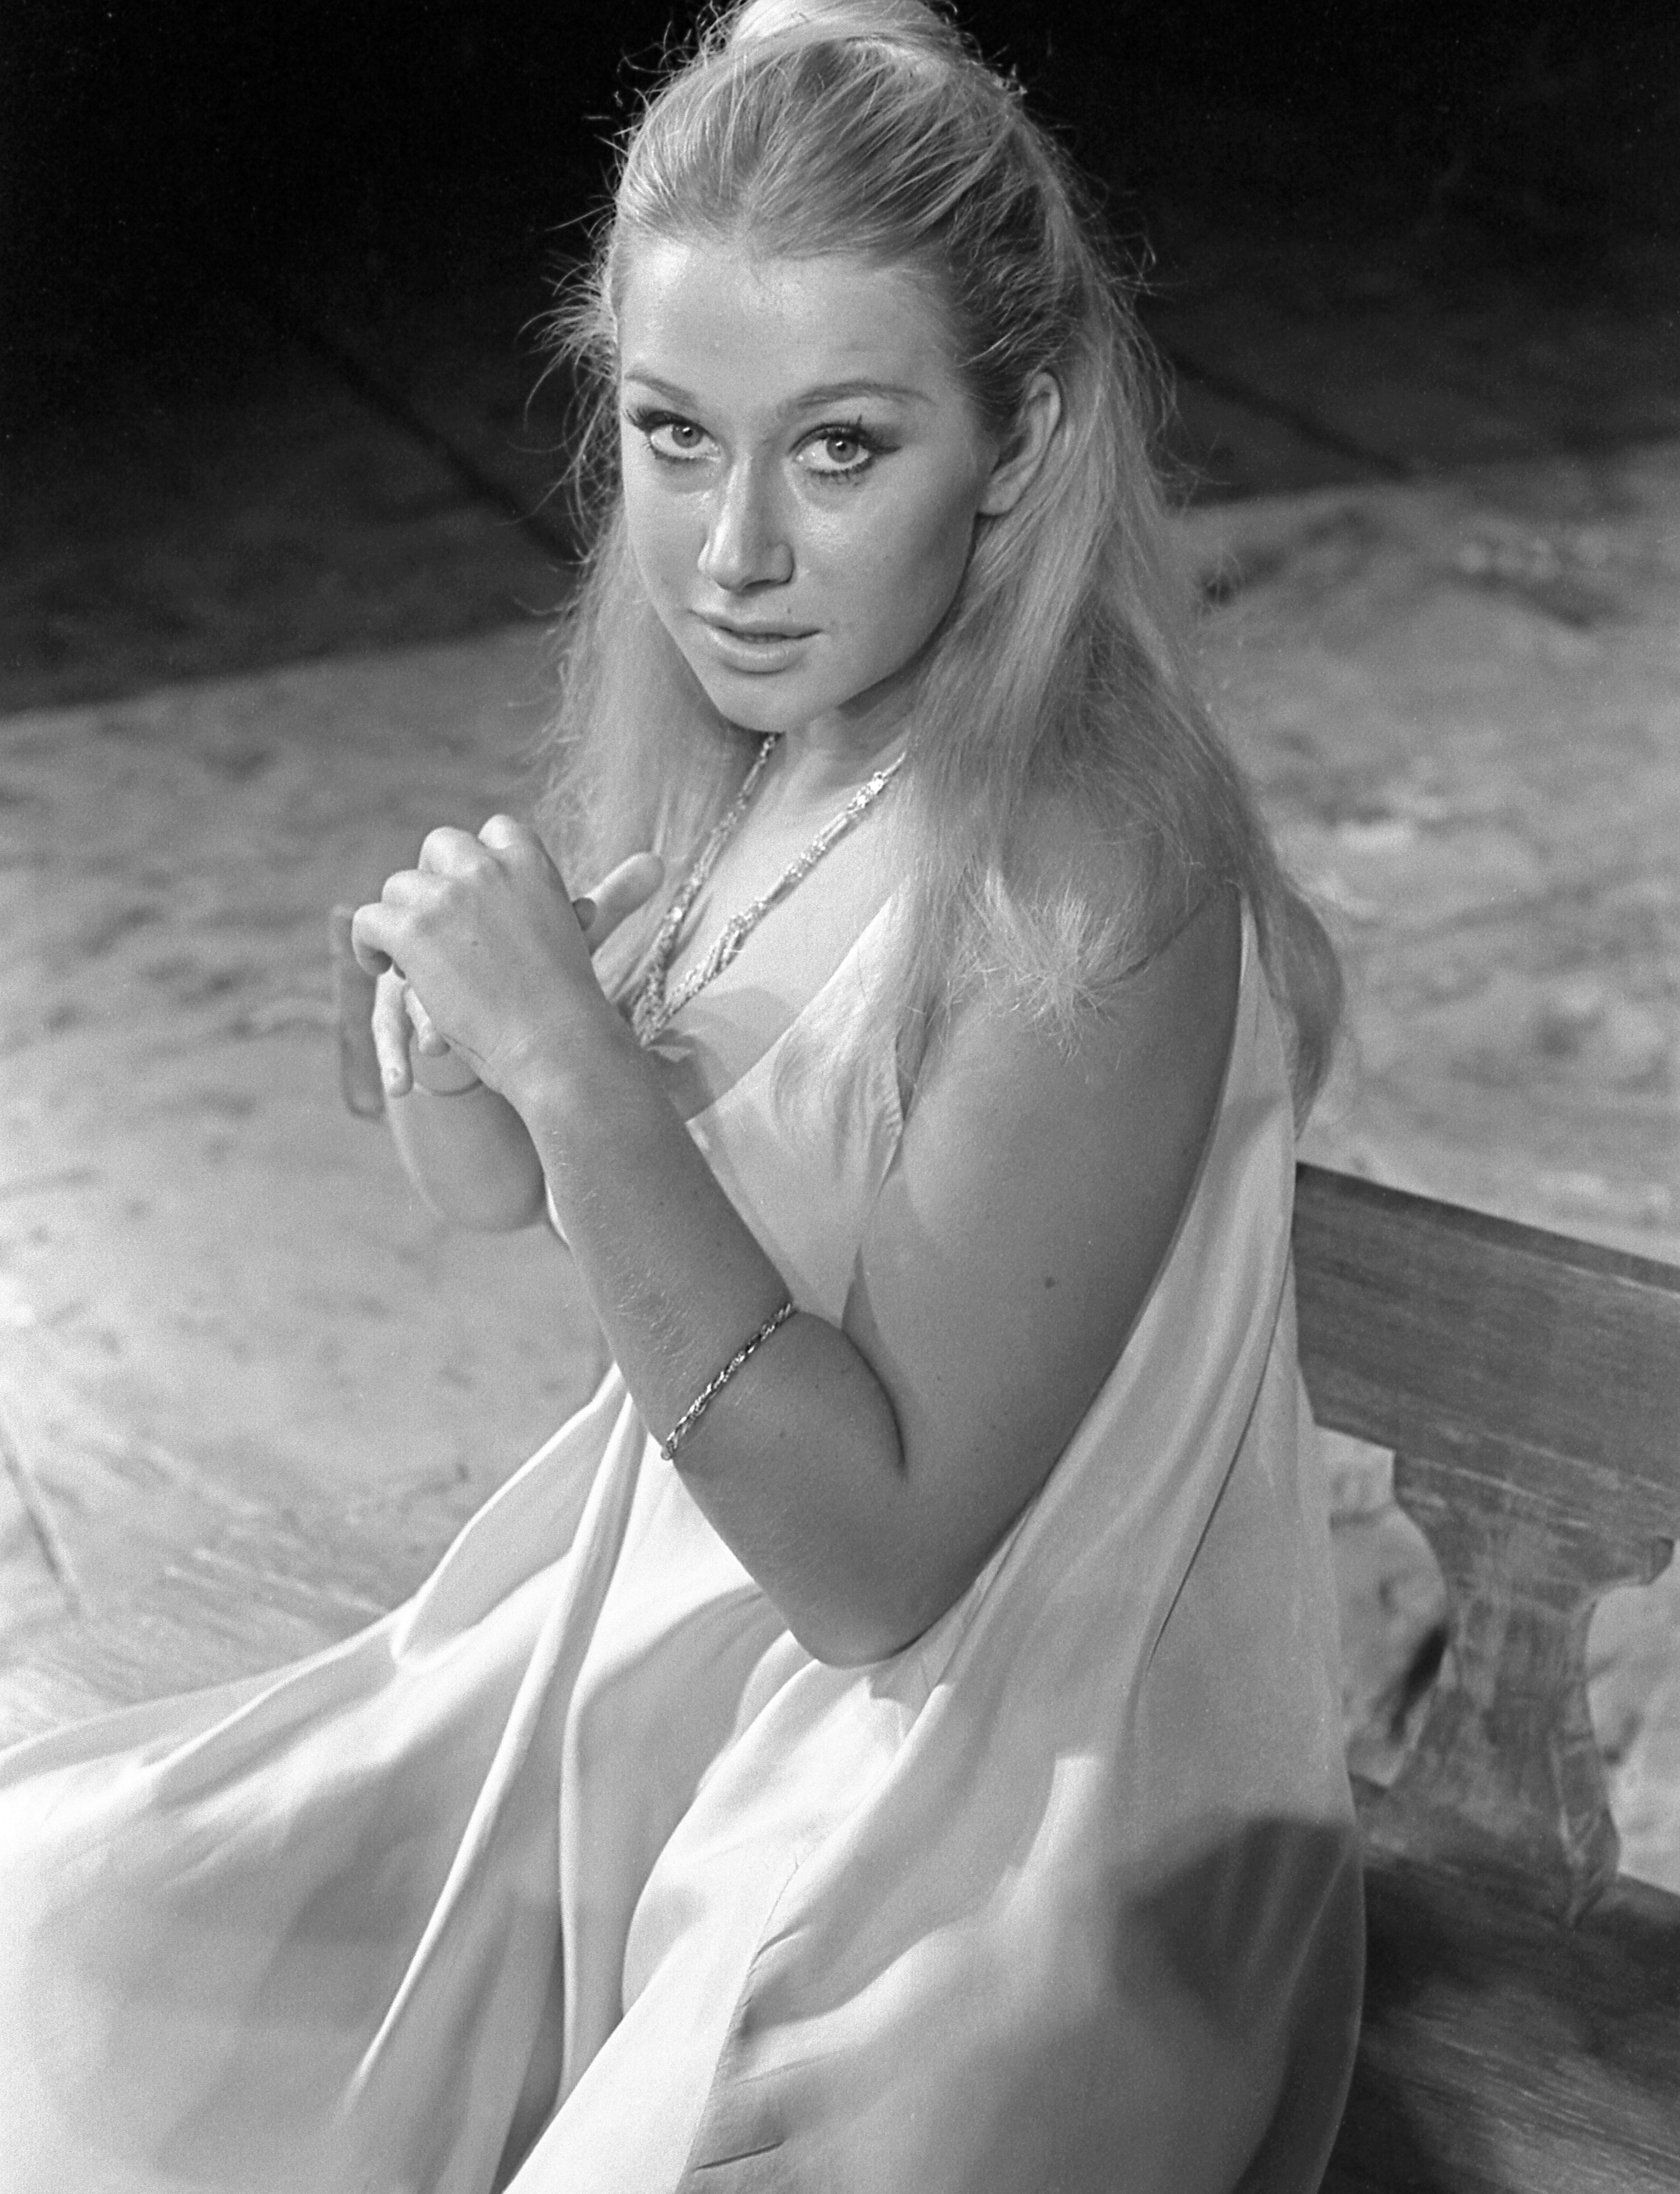 Actress Helen Mirren as Cressida, in a scene from "Troilus and Cressida" at the Royal Shakespeare Theatre in Stratford, 1968. | Source: Getty Images